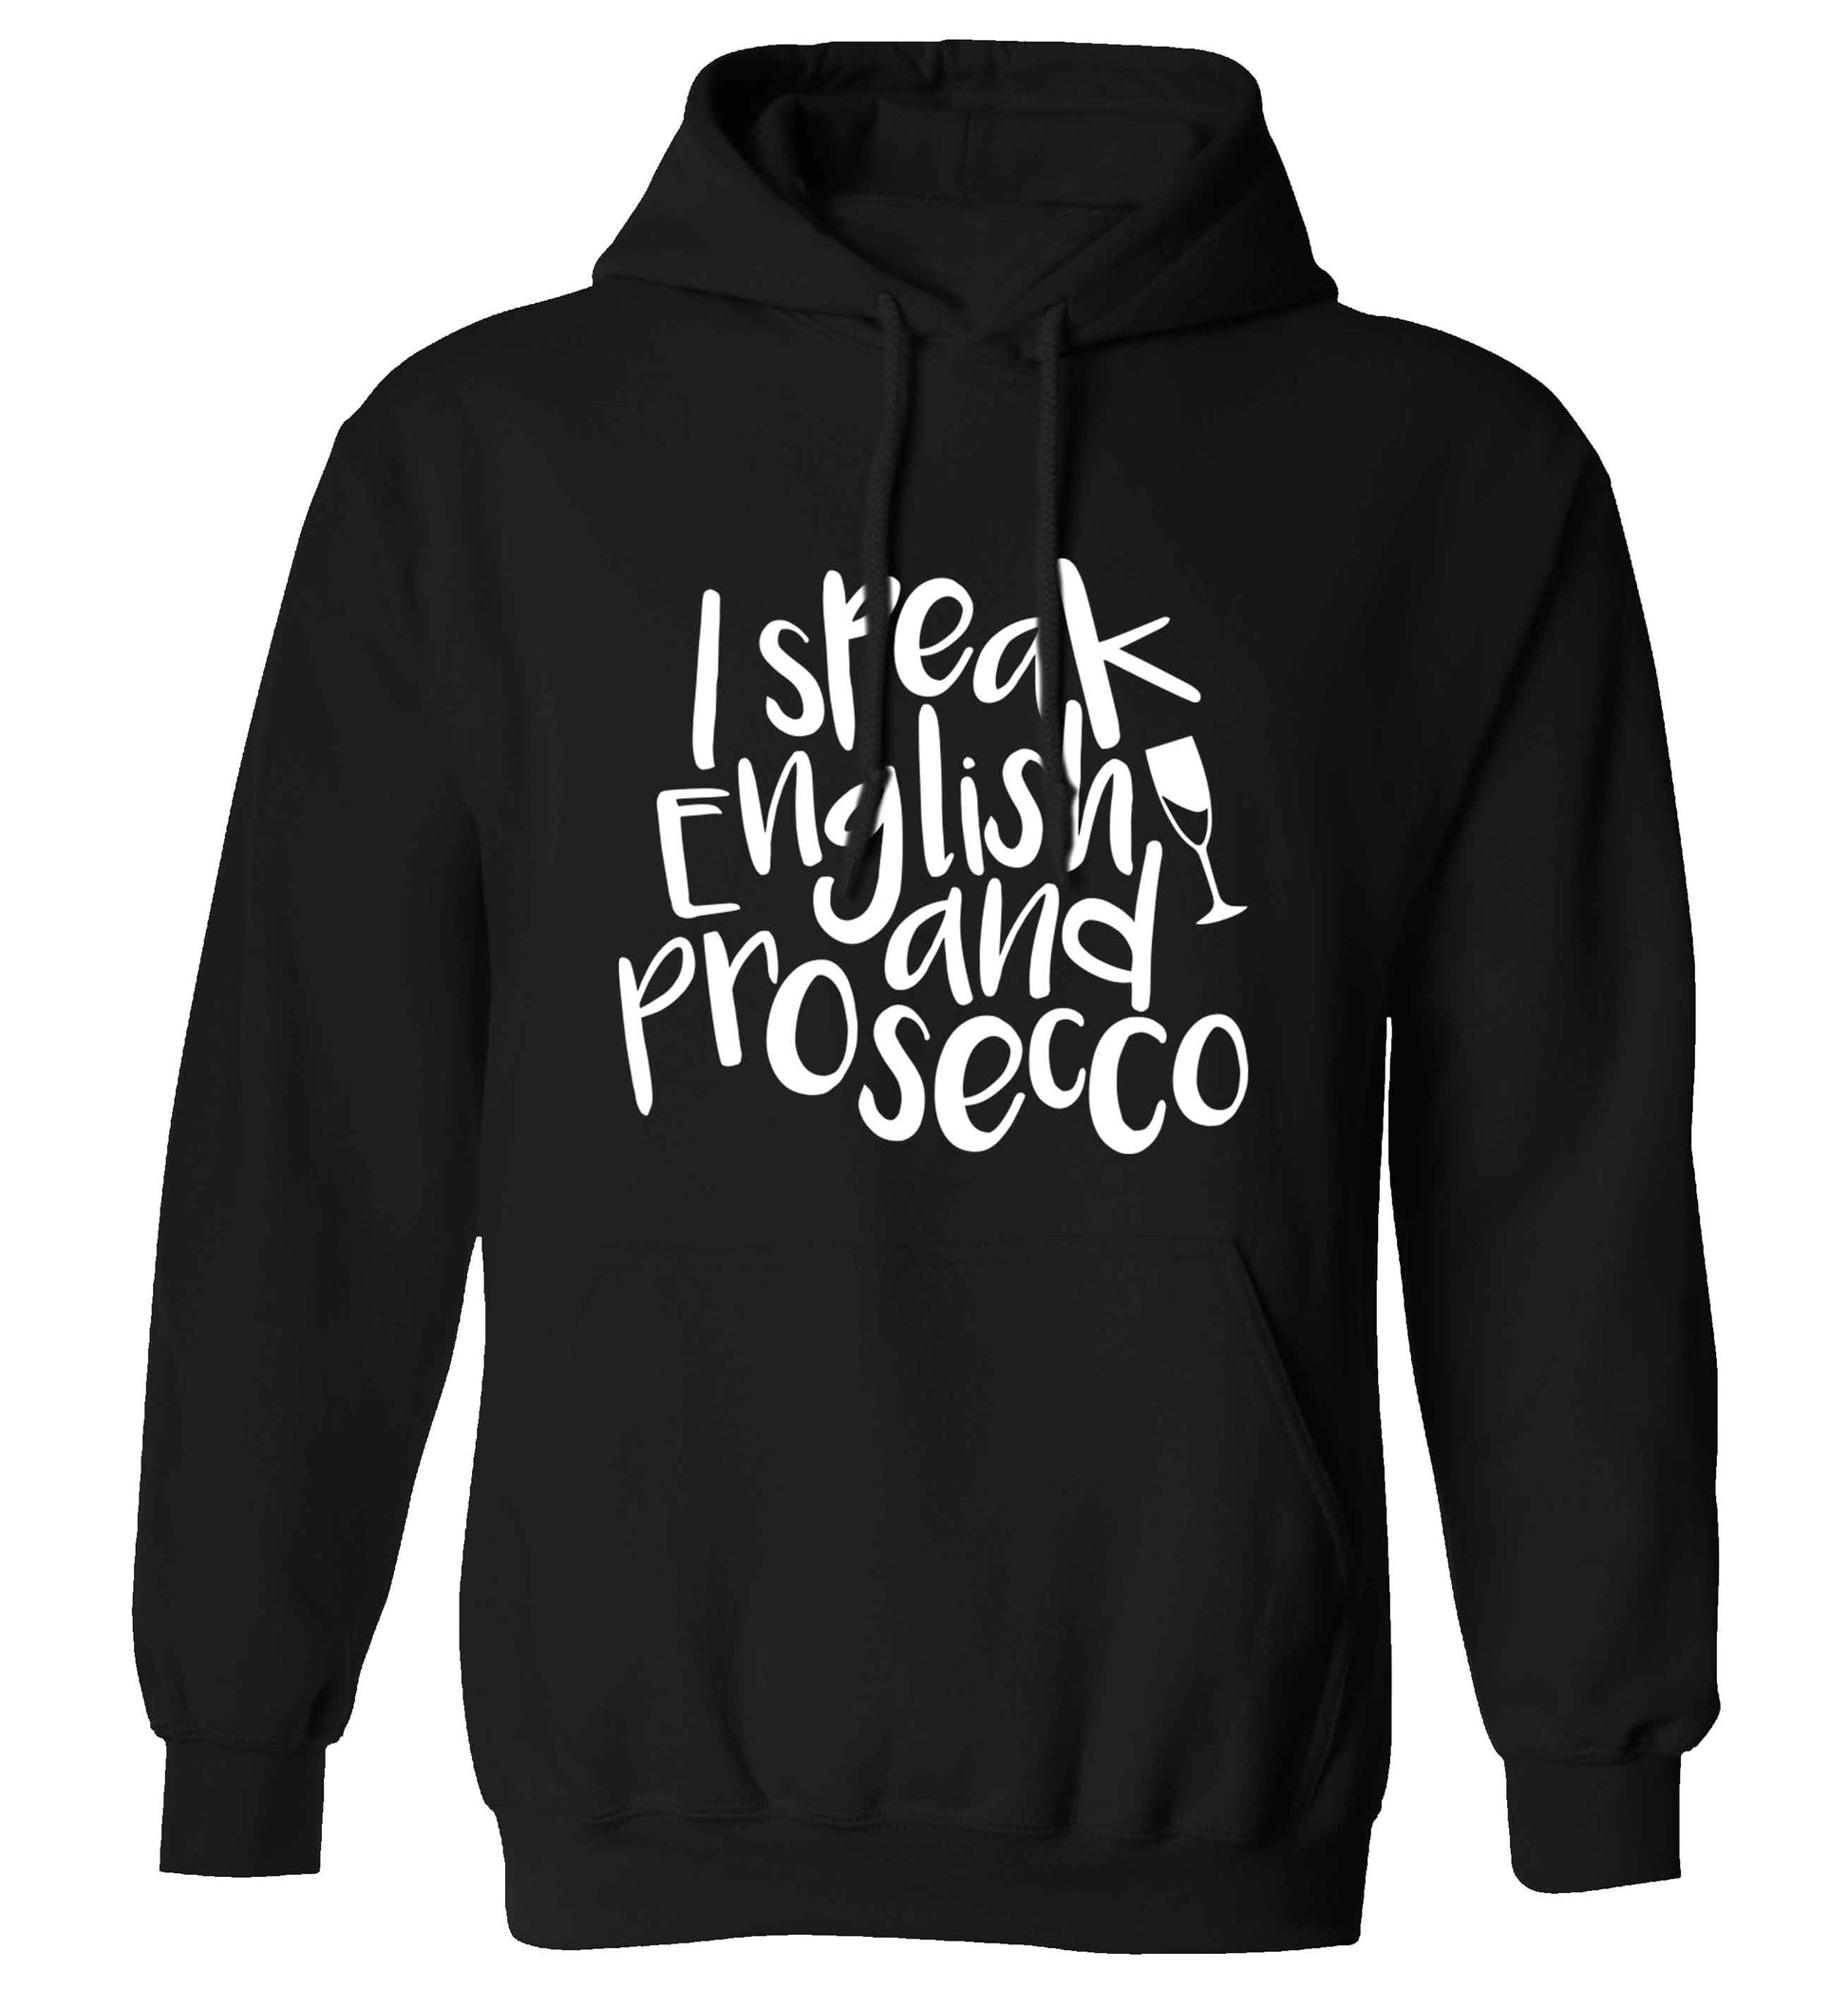 I speak English and prosecco adults unisex black hoodie 2XL